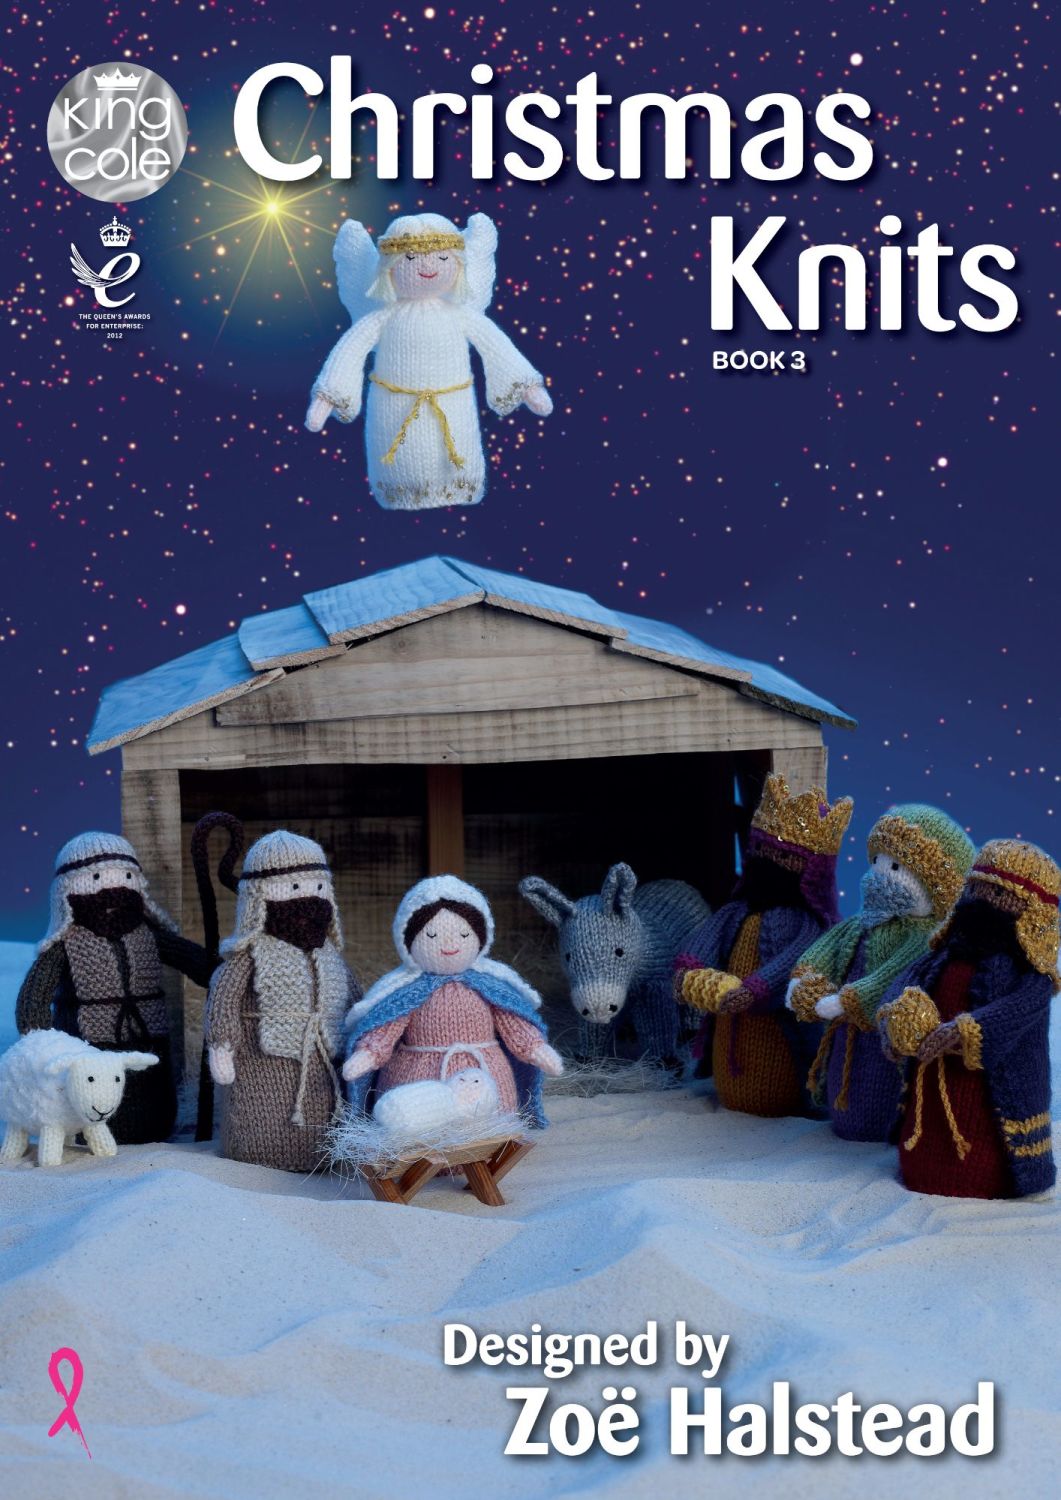 Christmas Knits Book 3 Designed by Zoe Halstead